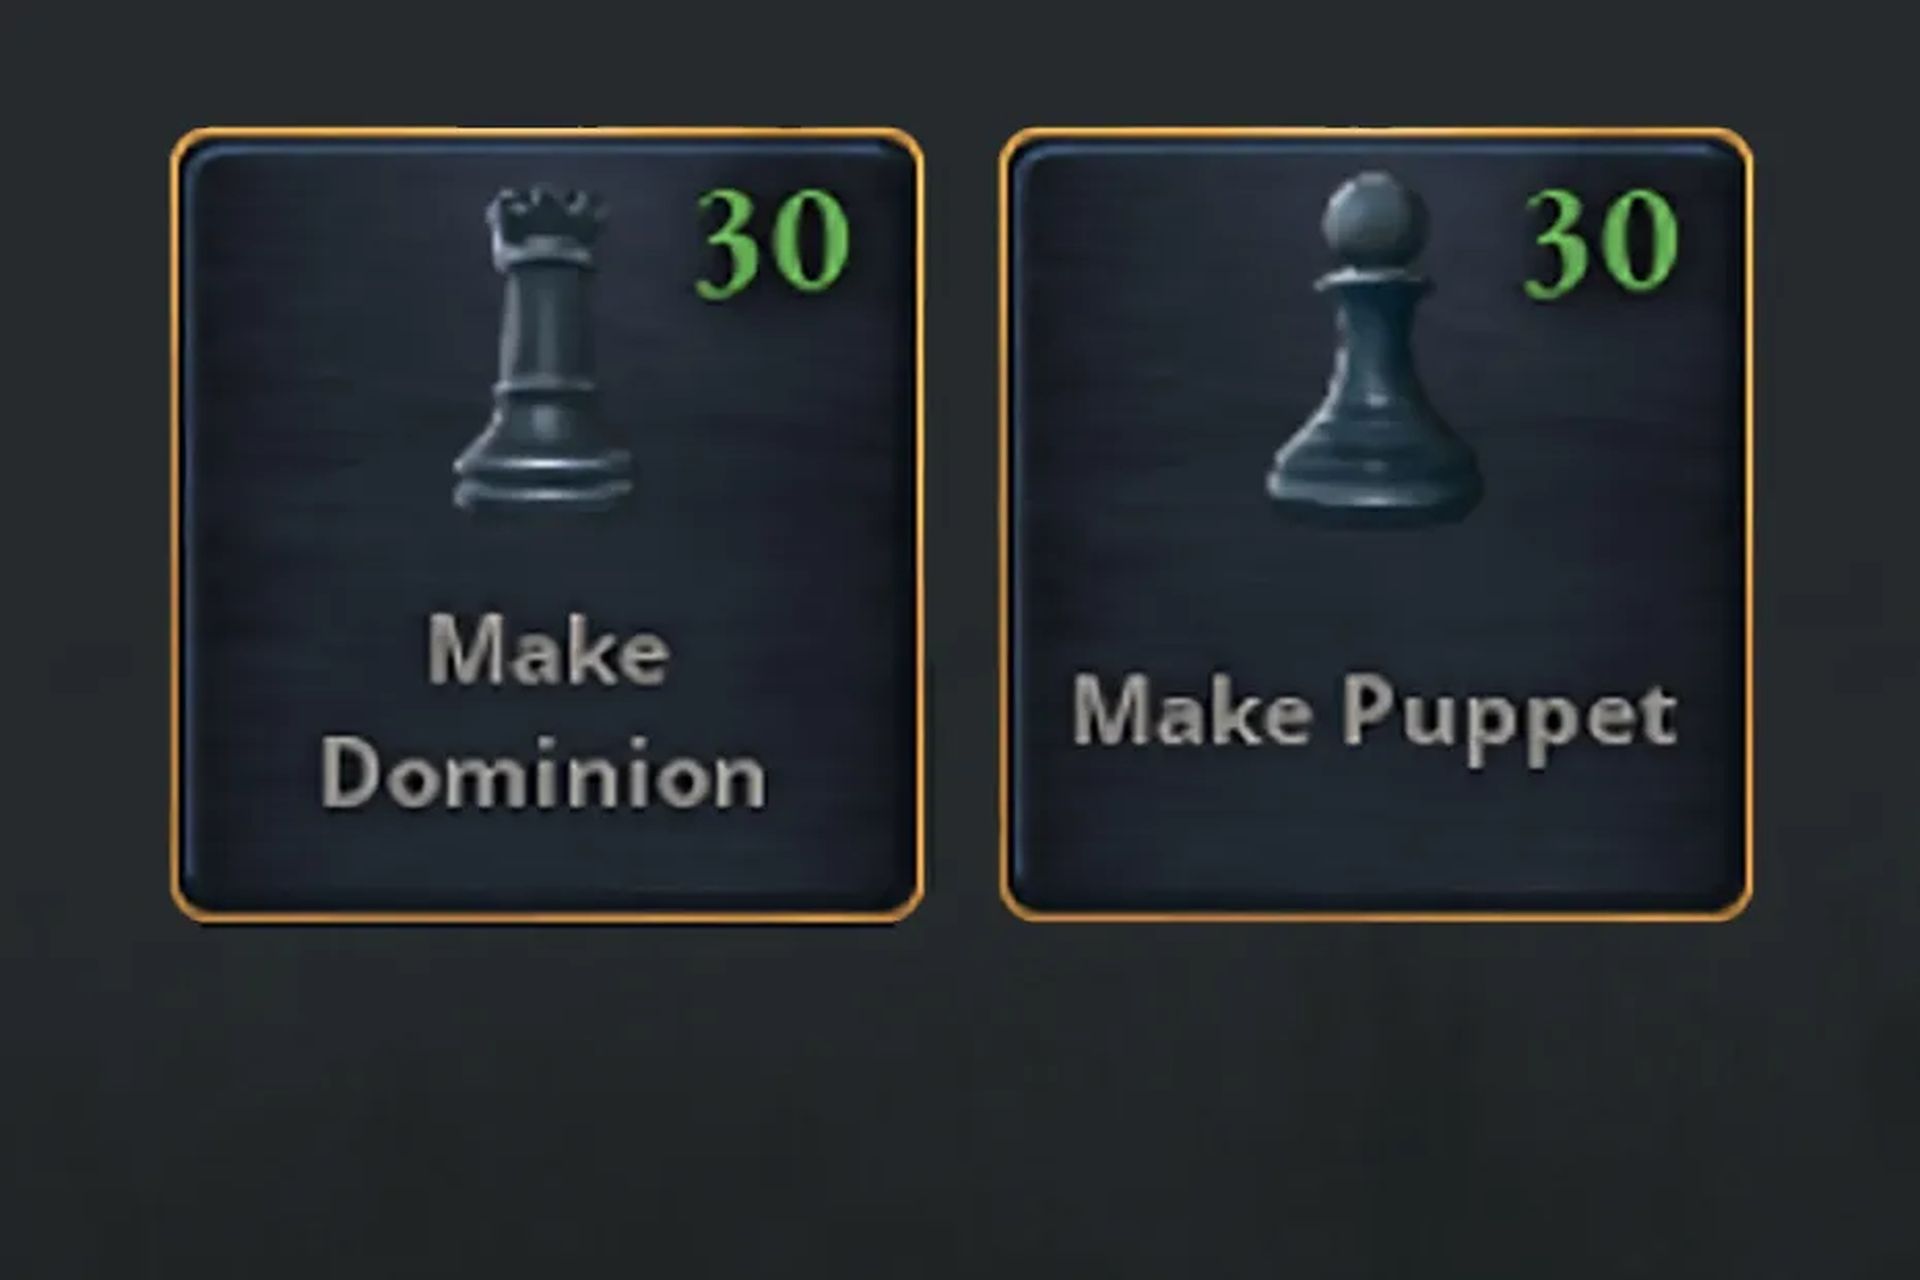 Victoria 3 annex subject: ''Make Puppet'' and ''Make Dominion'' options